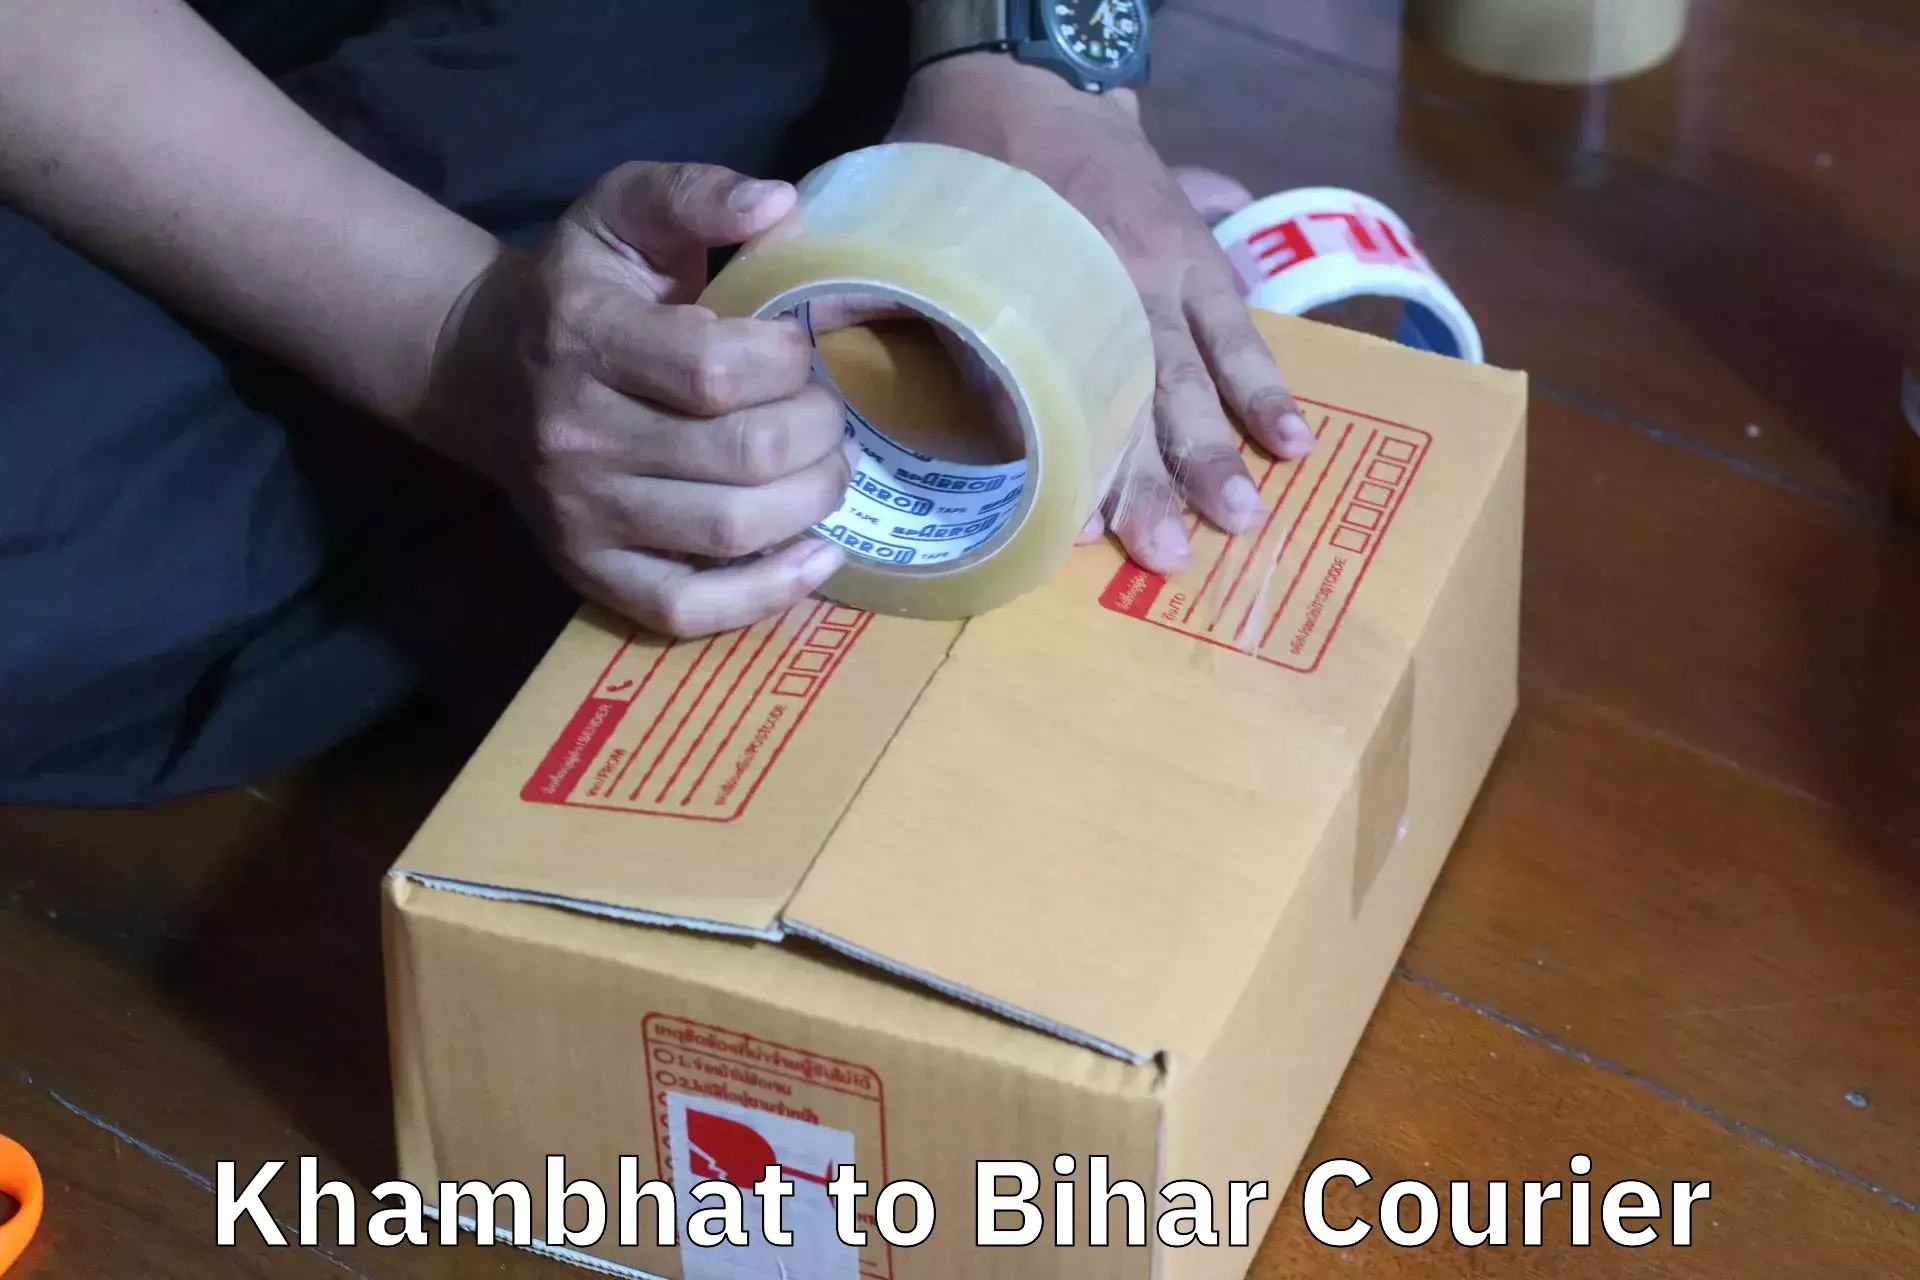 Dependable furniture movers Khambhat to Bhojpur